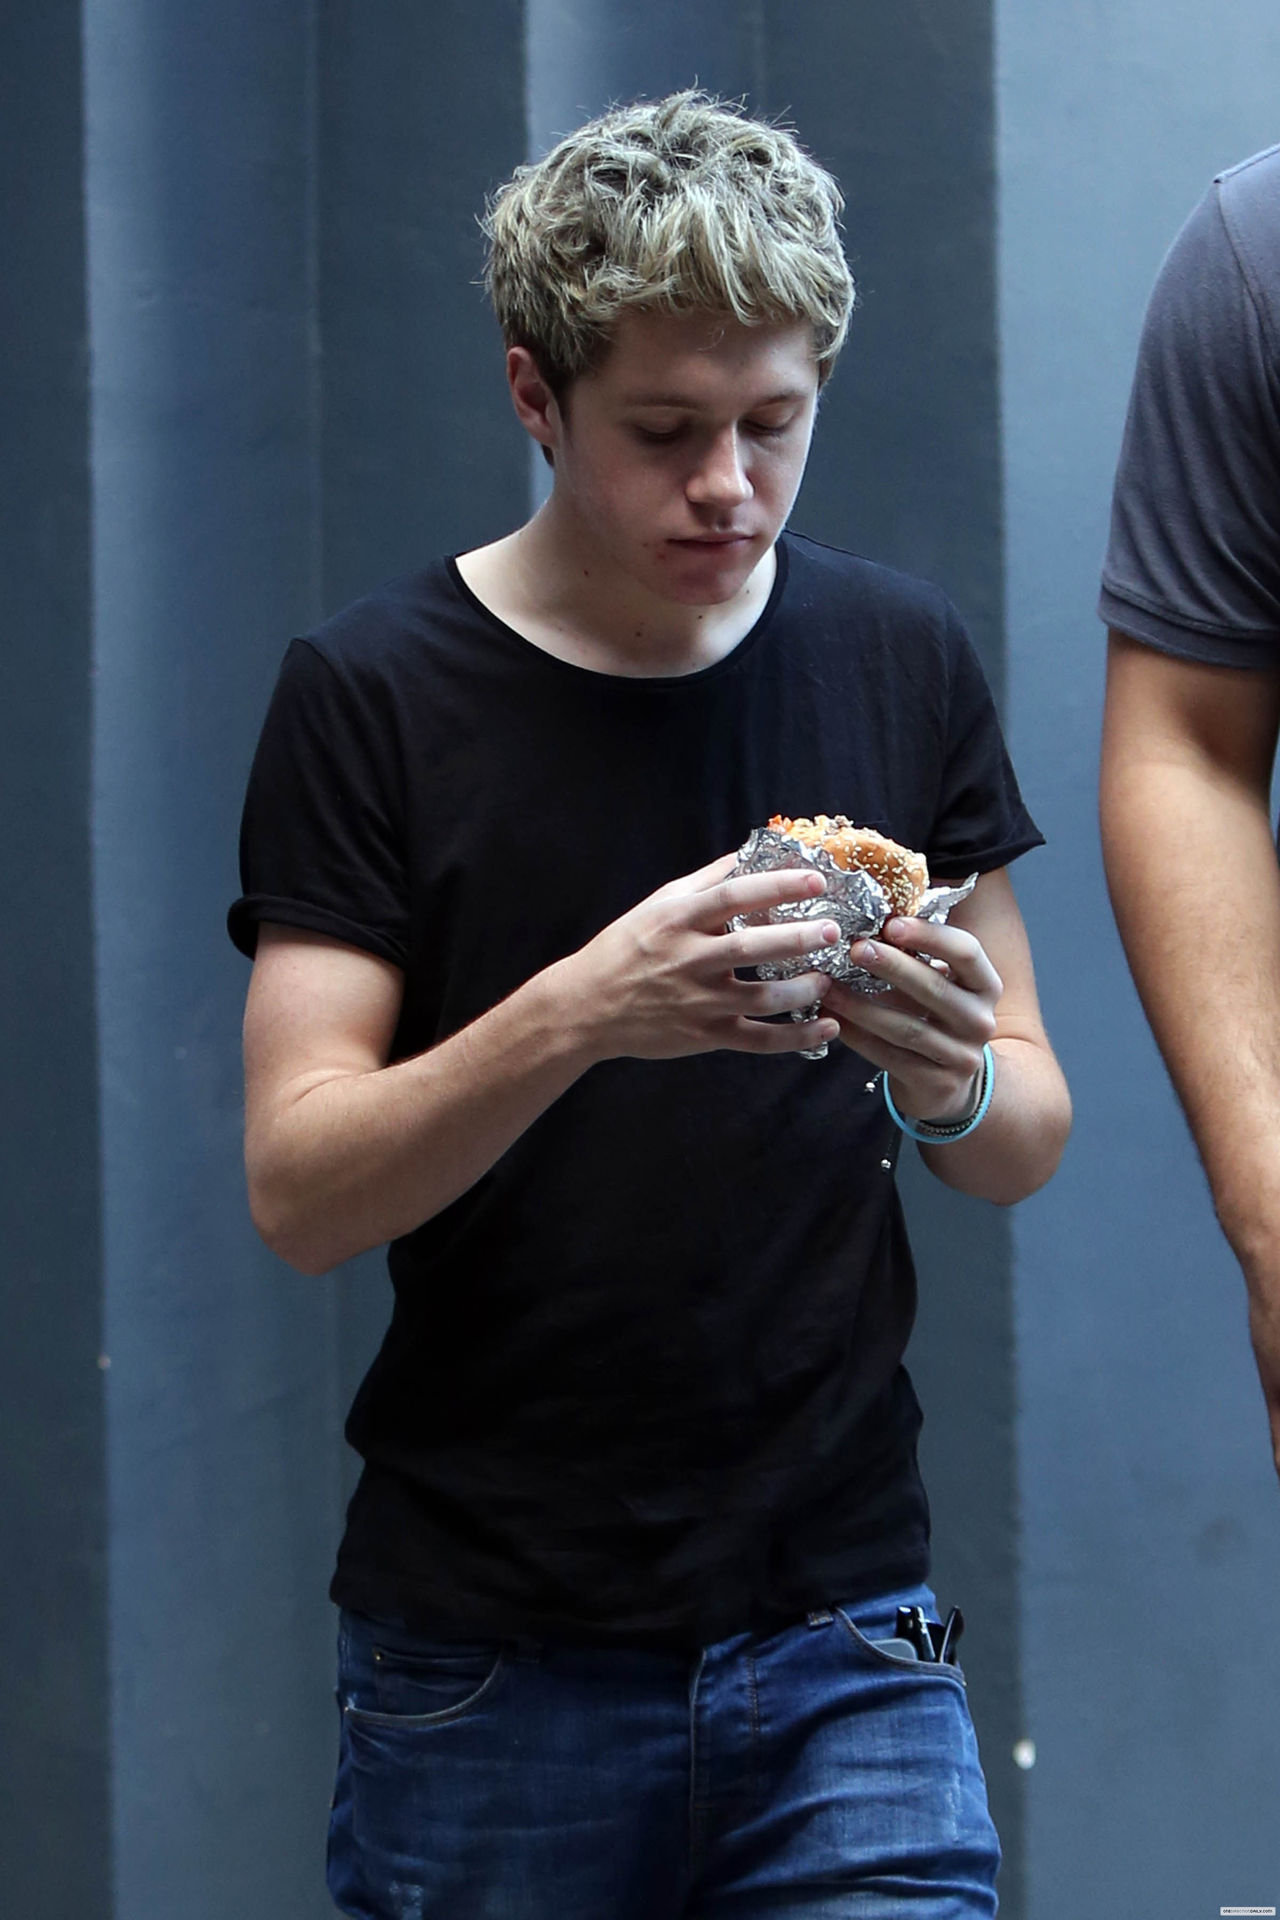  Niall eating a burger on Melrose Avenue in Los Angeles 10.11.2012 